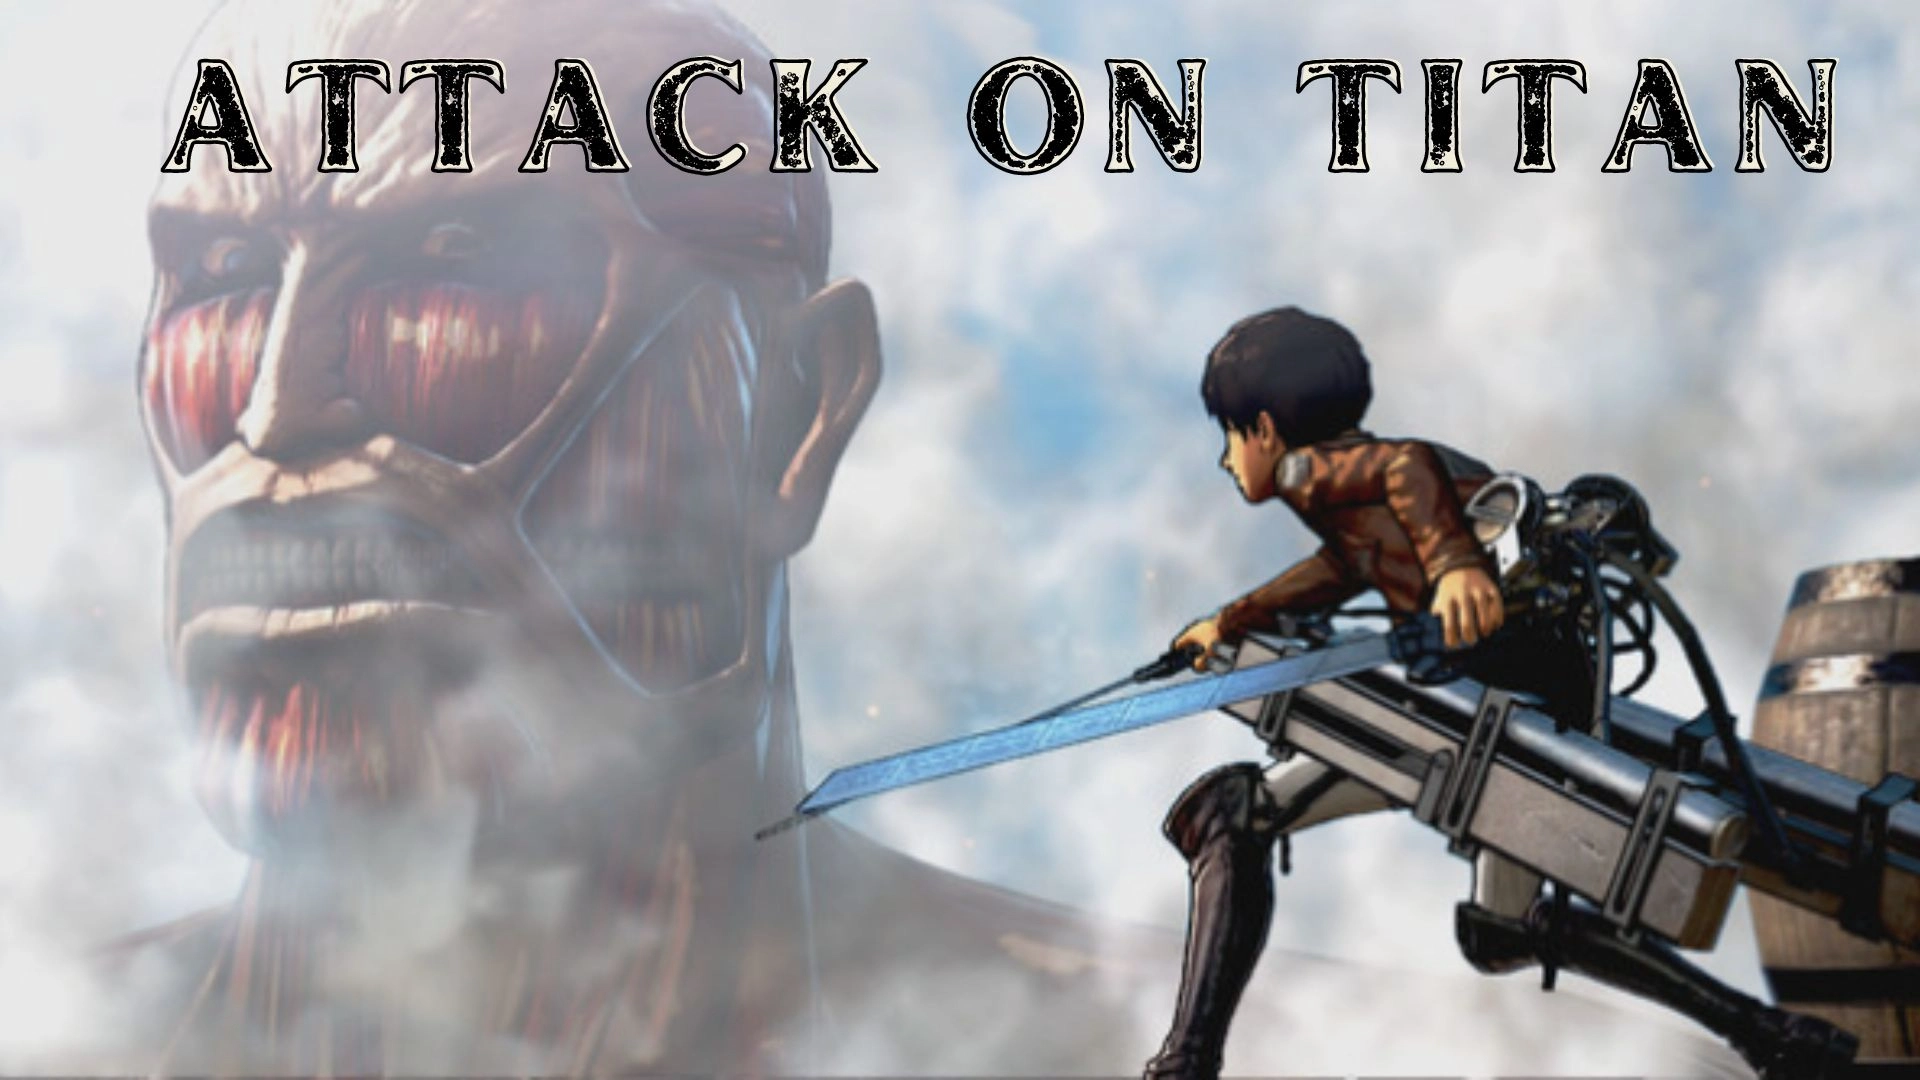 Why Attack On Titan Is Rated TV-MA: A Parent's Guide